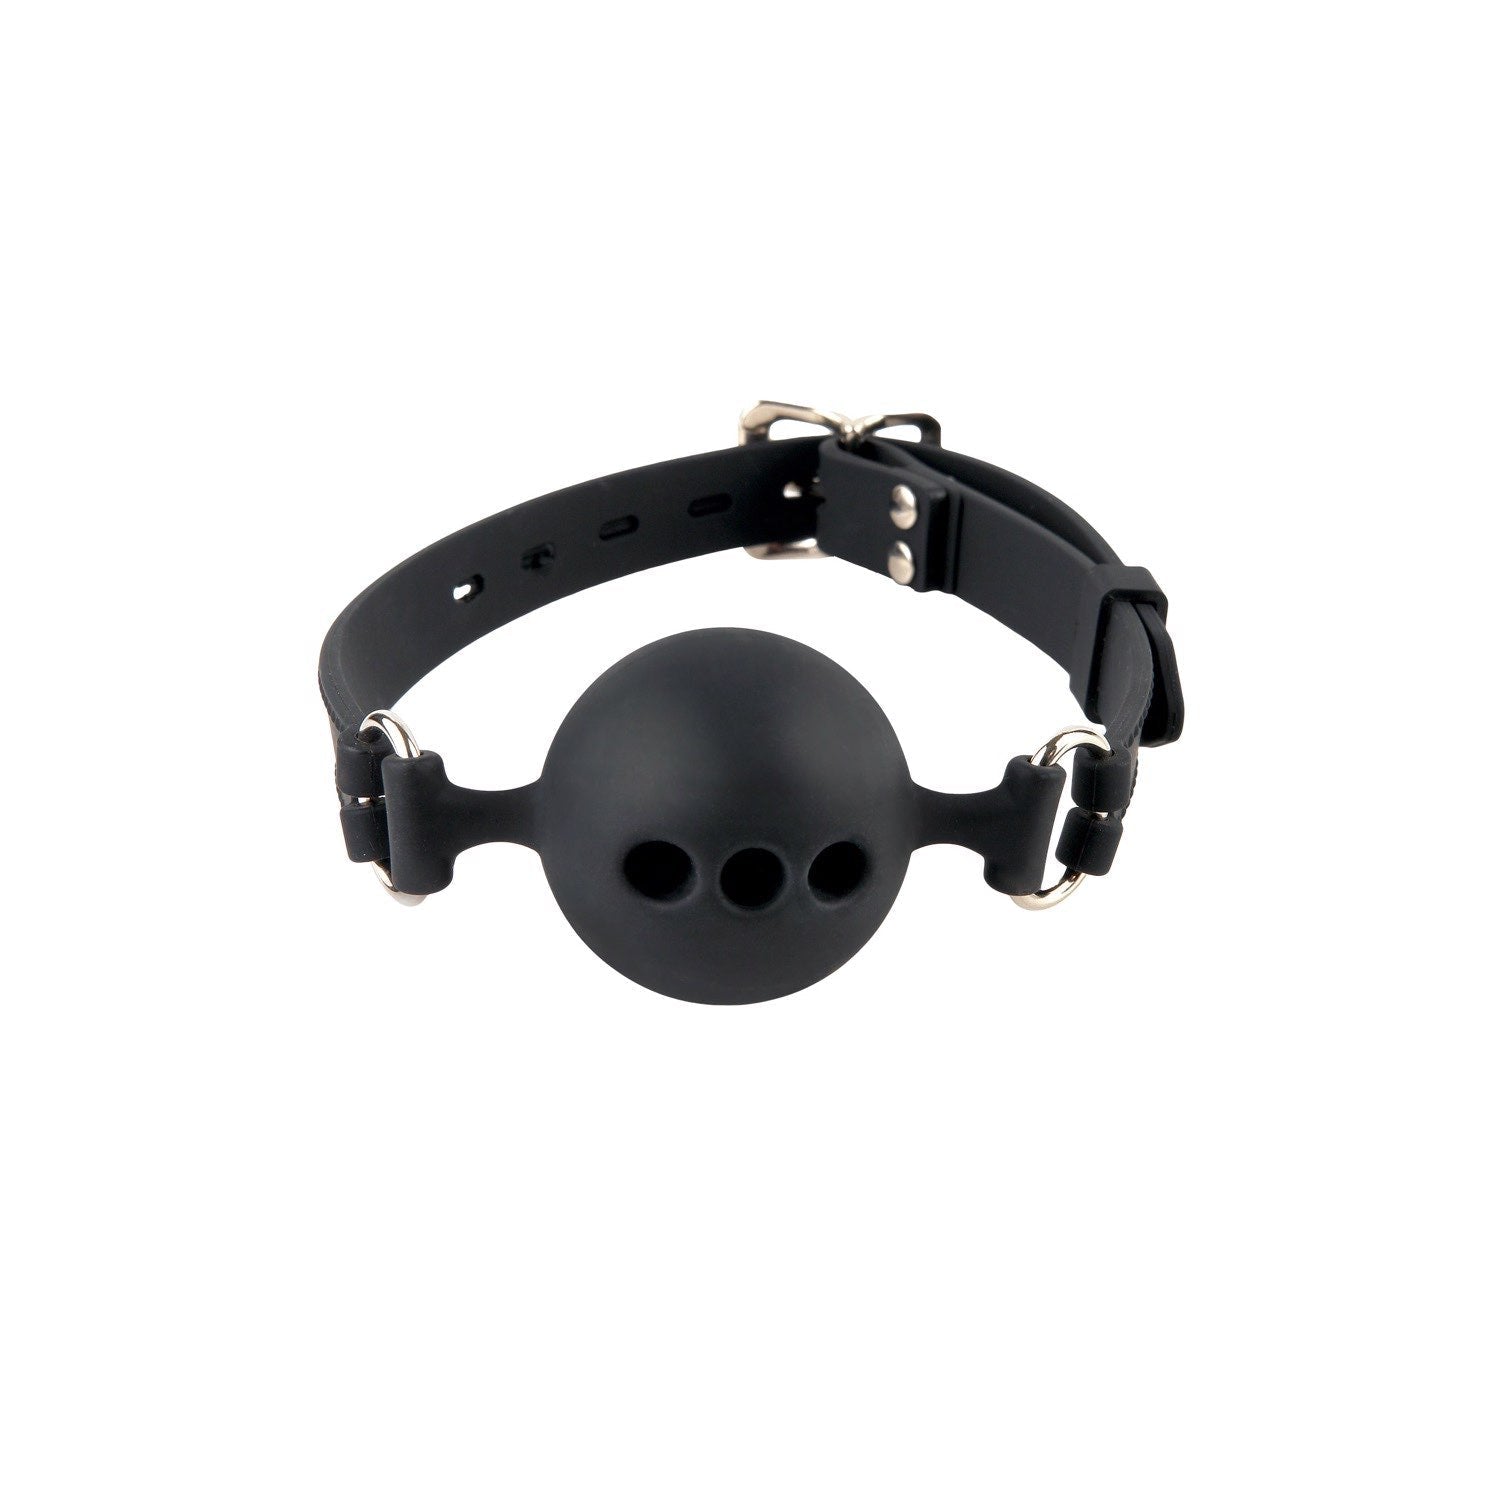 Fetish Fantasy Extreme Silicone Breathable Ball Gag - Black Small Mouth Restraint by Pipedream